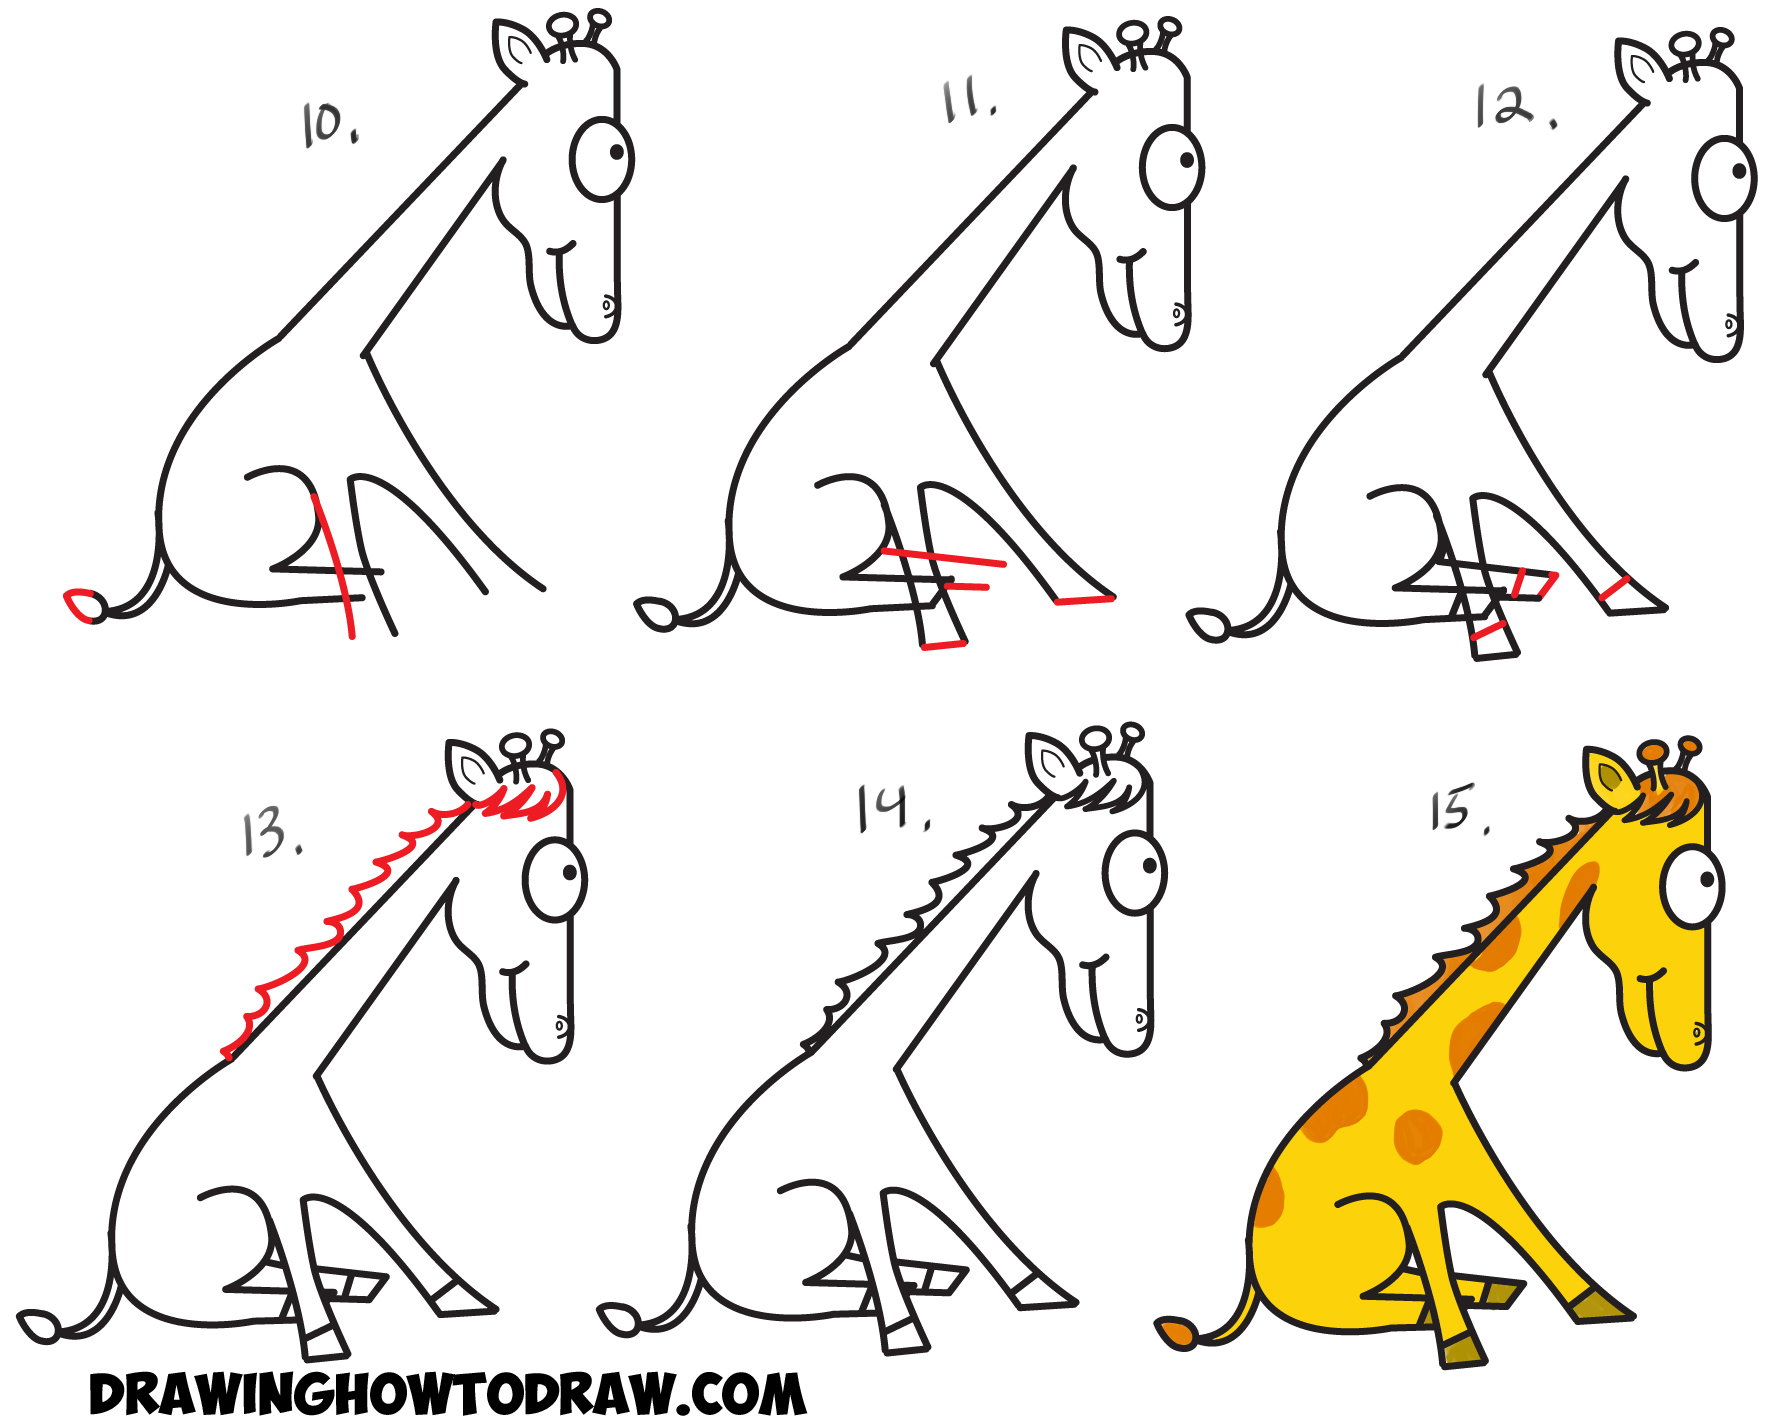 Learn How to Draw a Cartoon Giraffe from Lowercase Letter j Shape in Simple Step by Step Drawing Tutorial for Kids